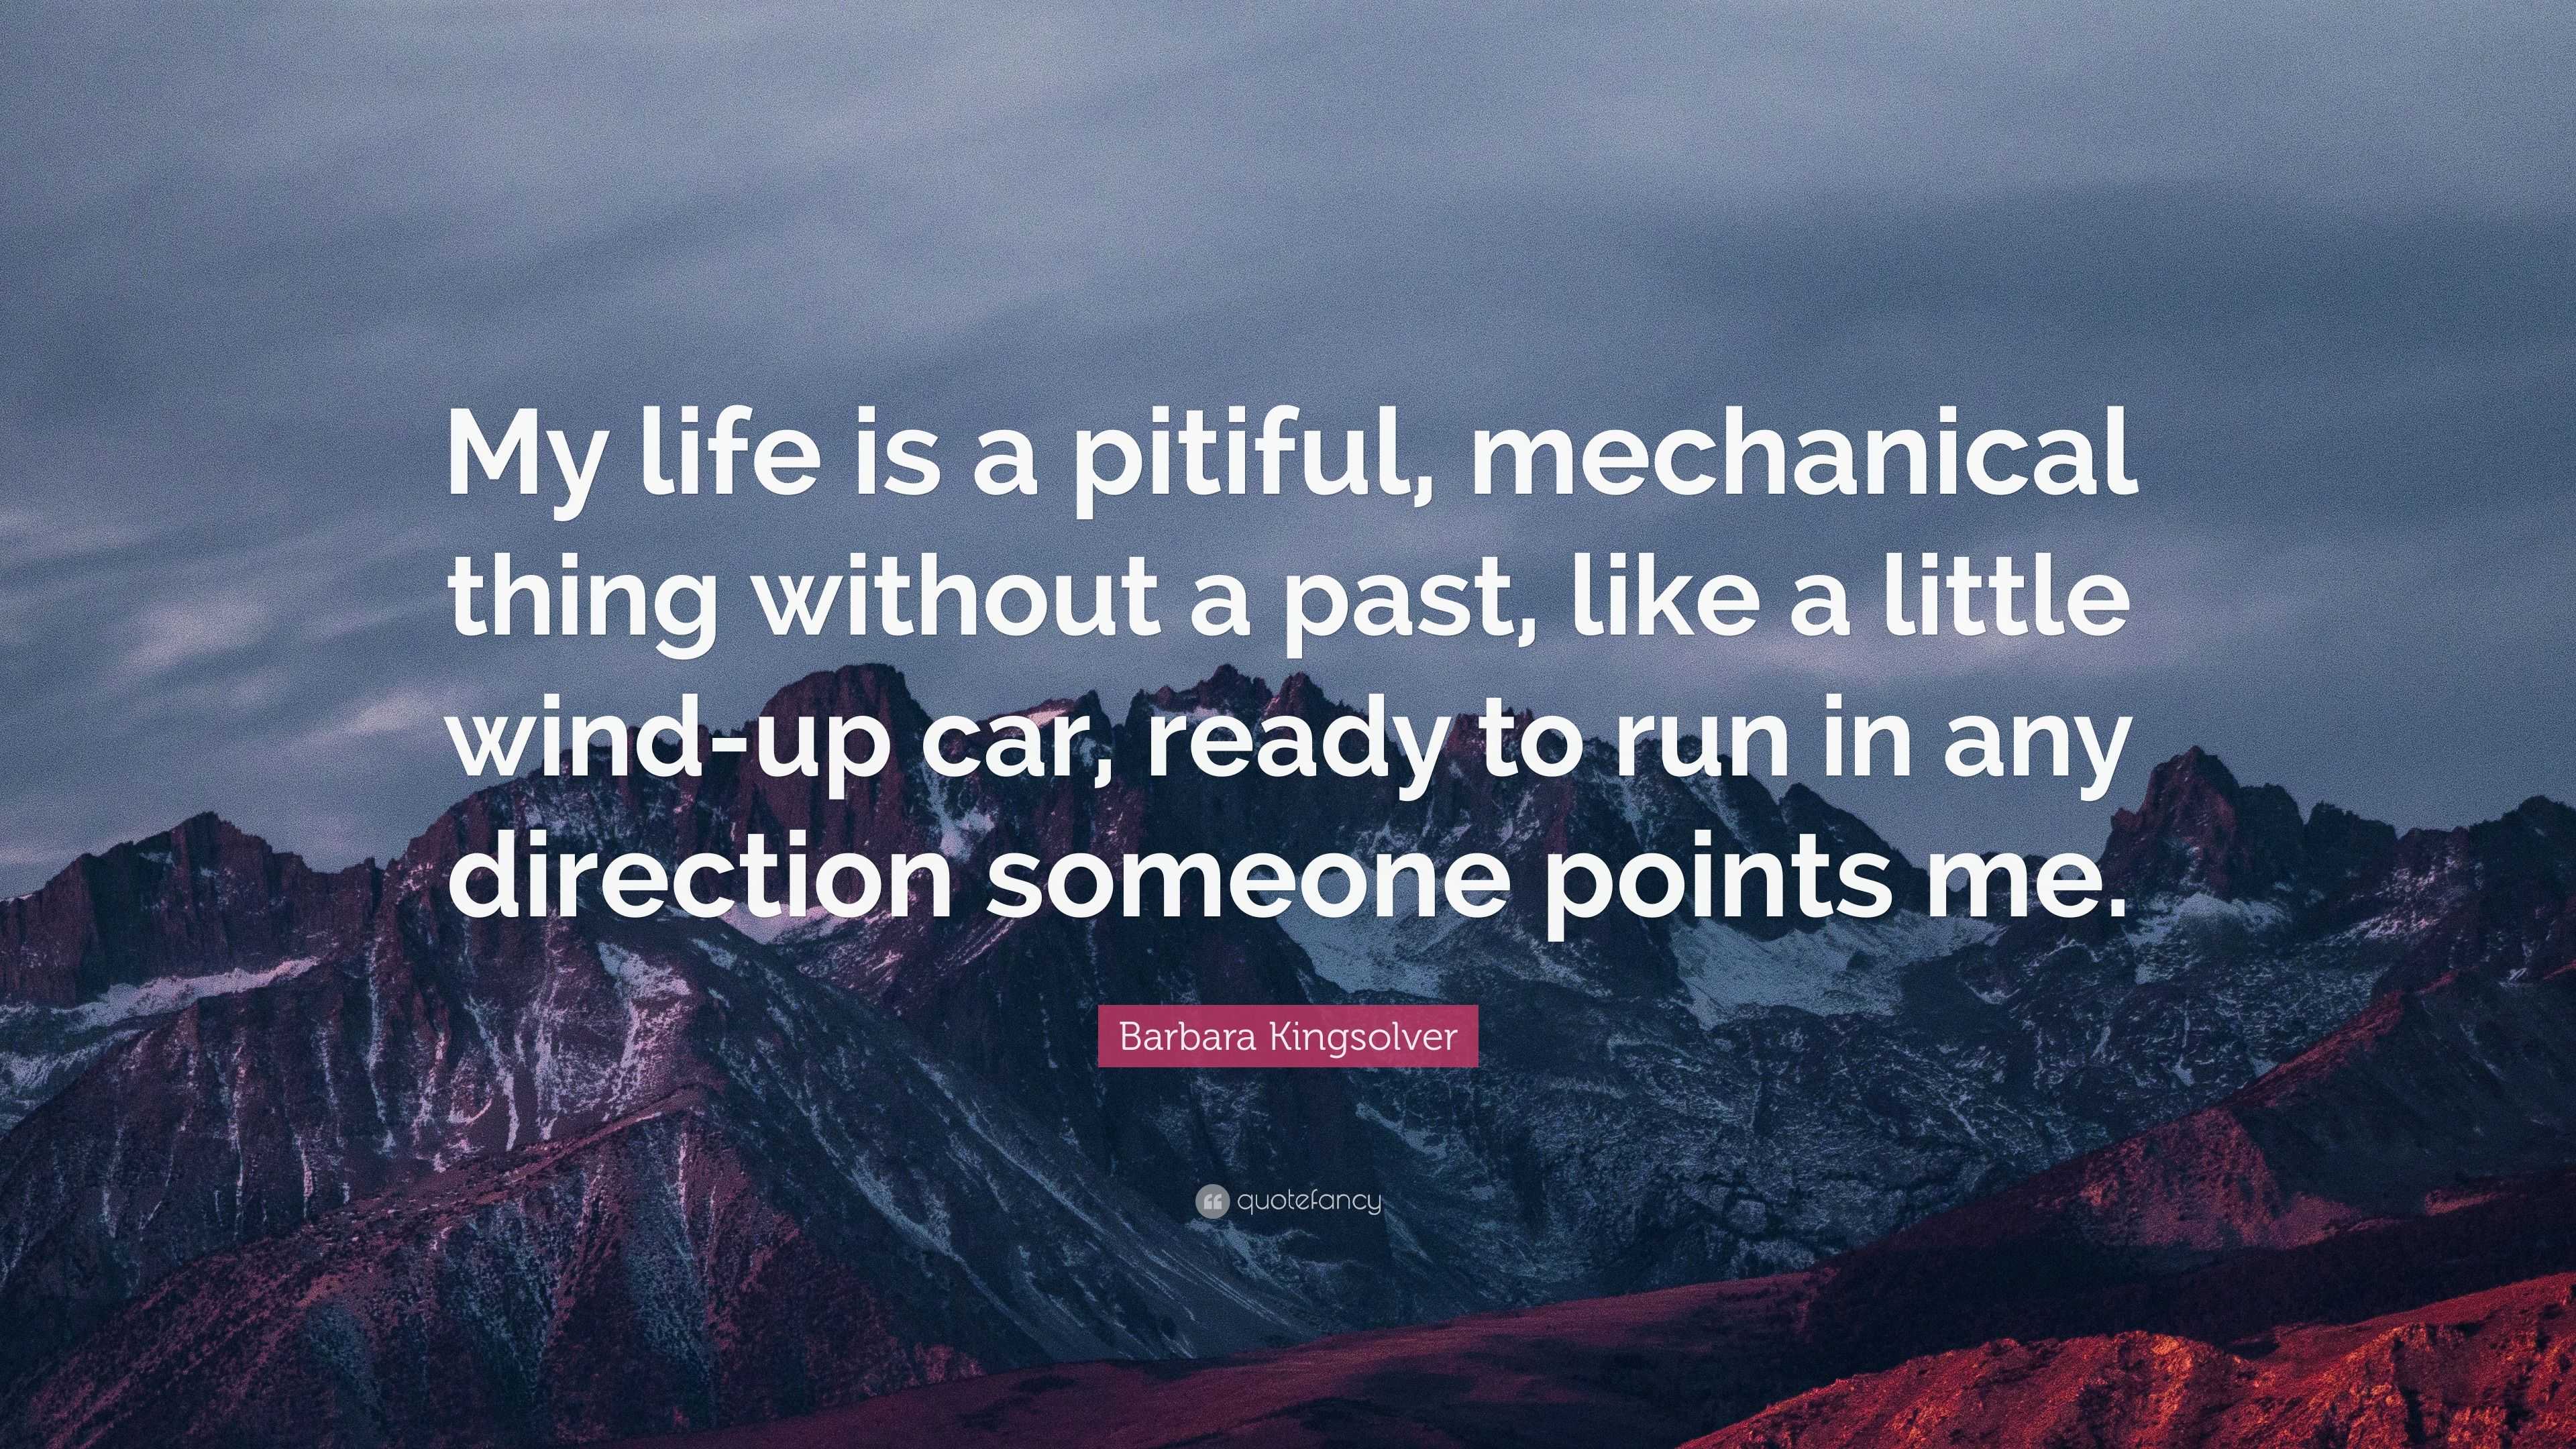 Barbara Kingsolver Quote “My life is a pitiful mechanical thing without a past